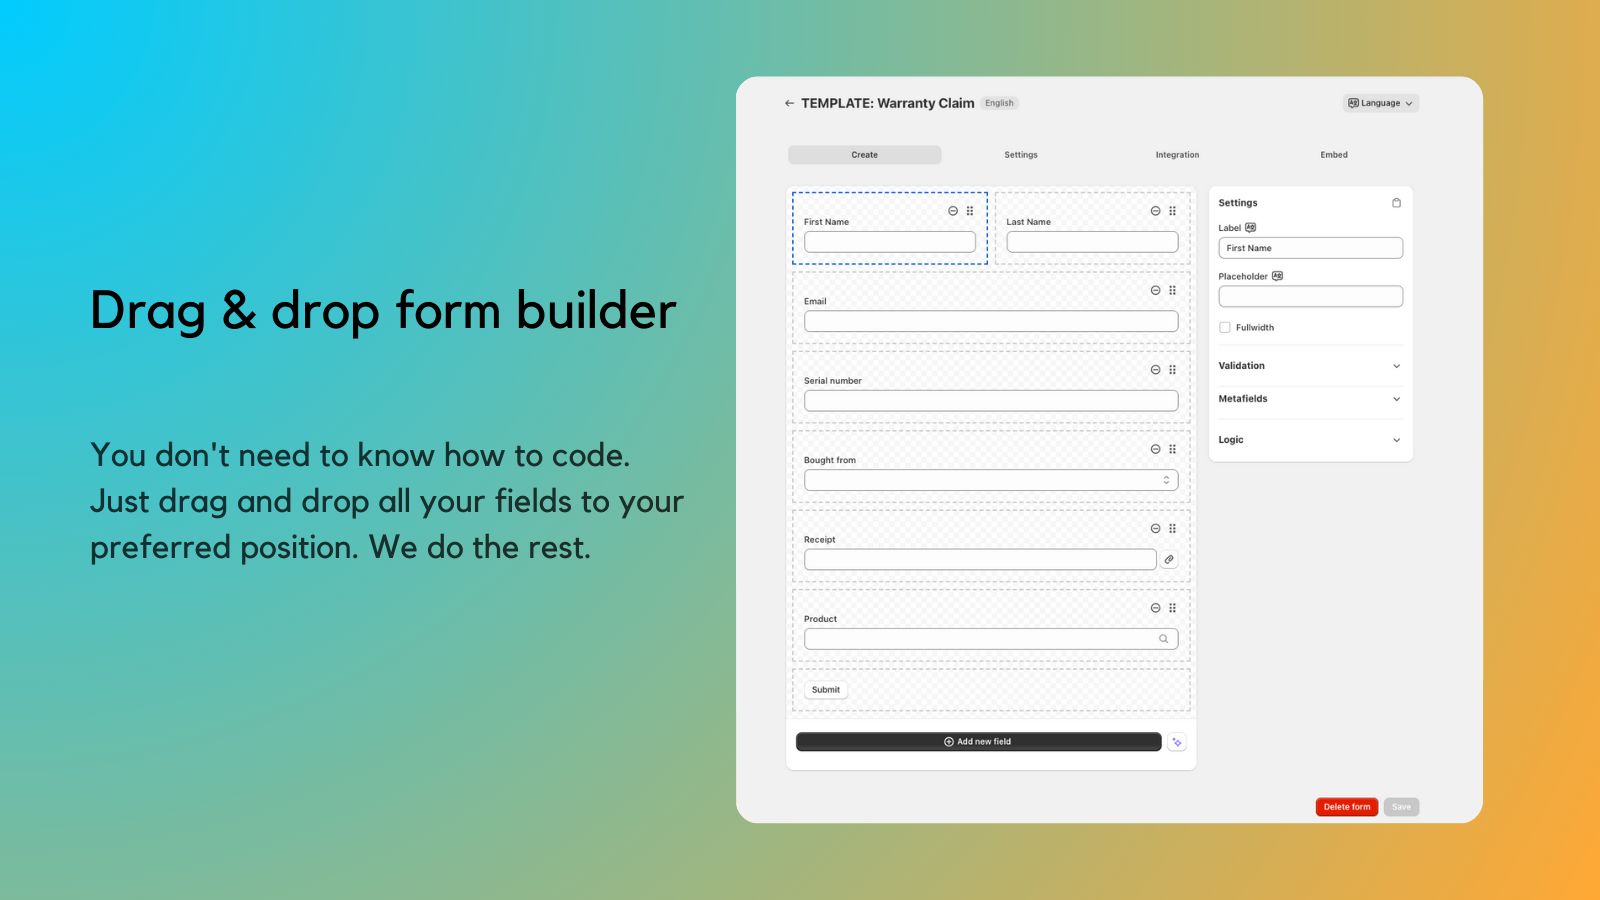 Drag & drop - build your form like you want with ease.